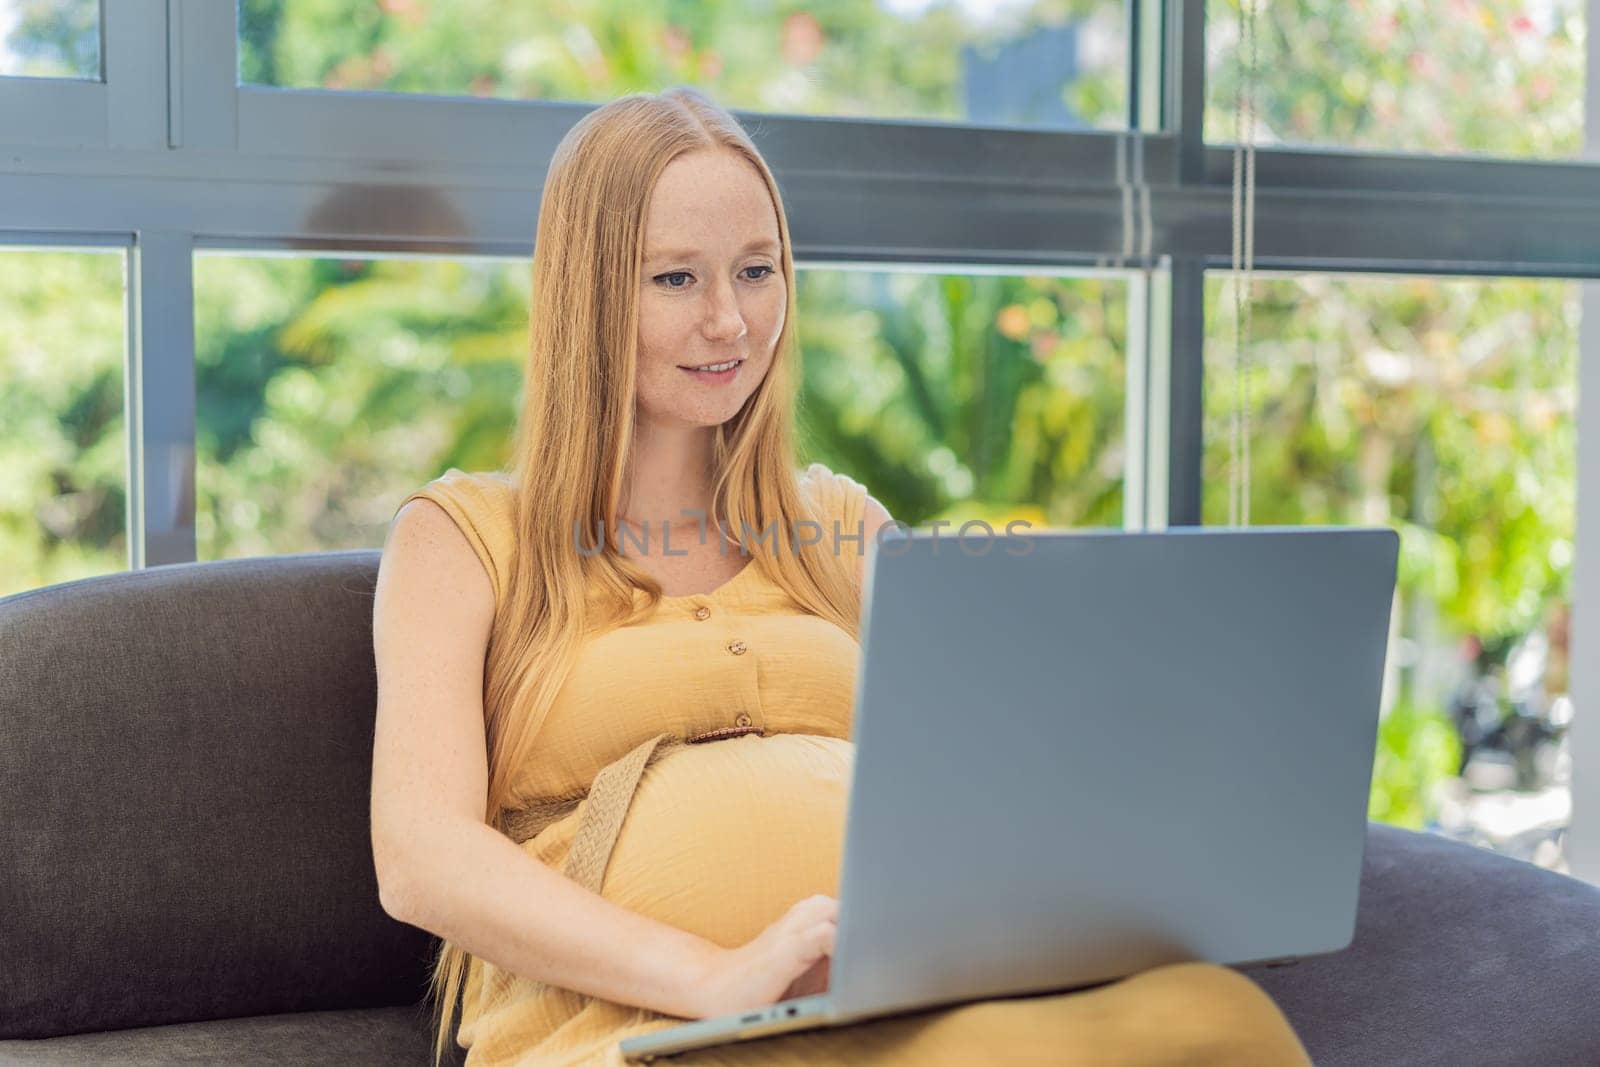 Pregnant woman working on laptop. Expectant woman efficiently works from home during pregnancy, blending professional commitment with maternal duties by galitskaya